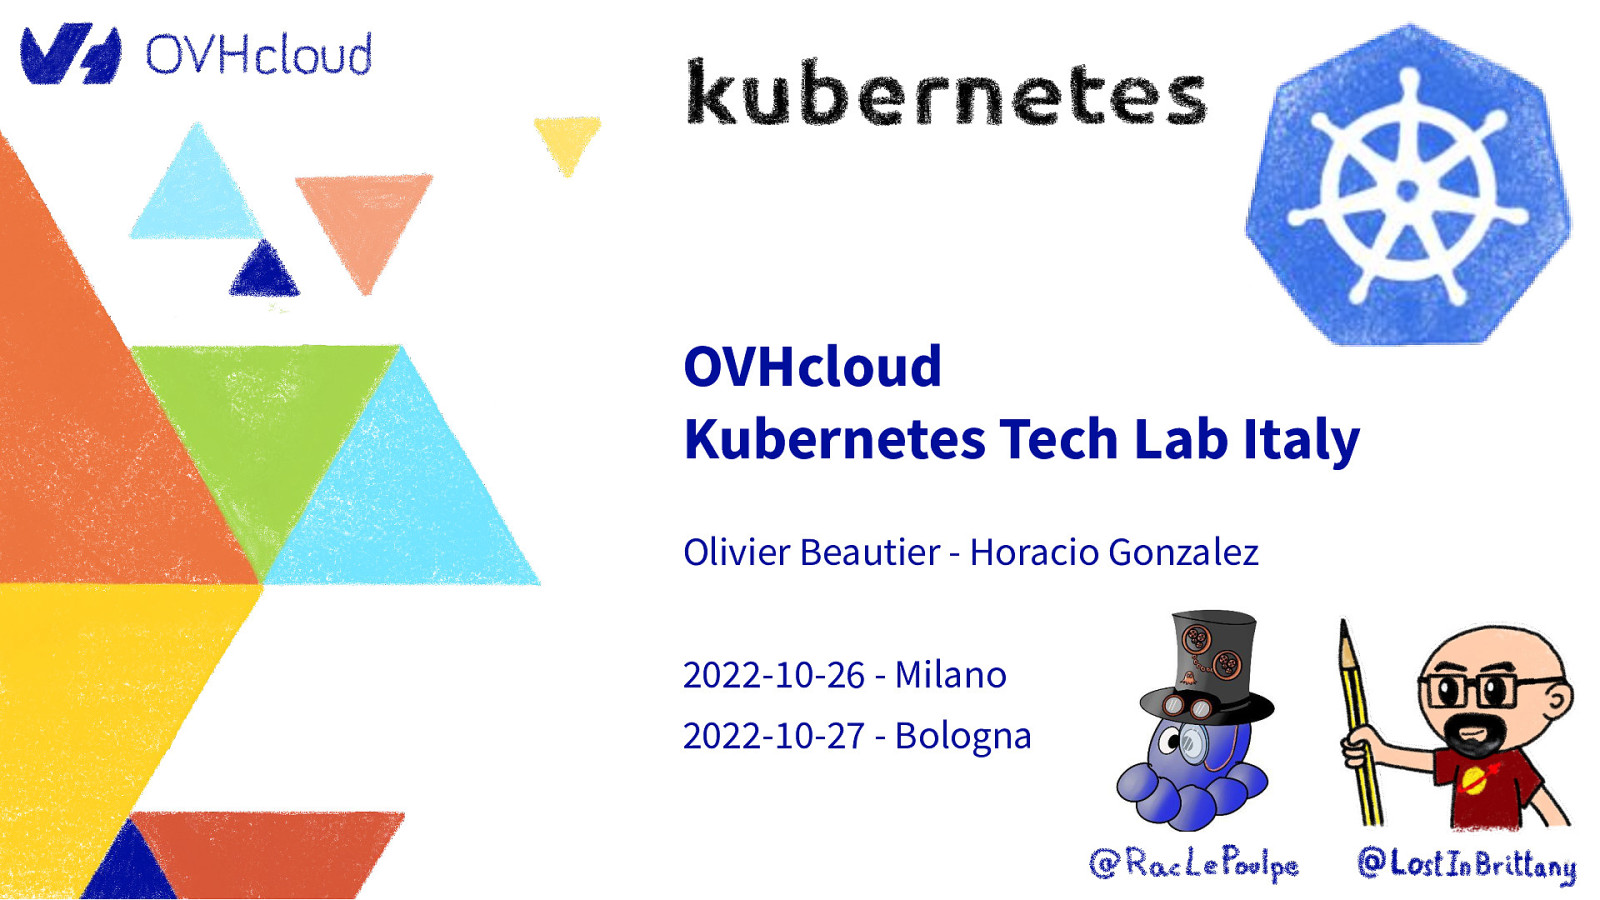 OVHcloud Kubernetes Tech Lab Italy